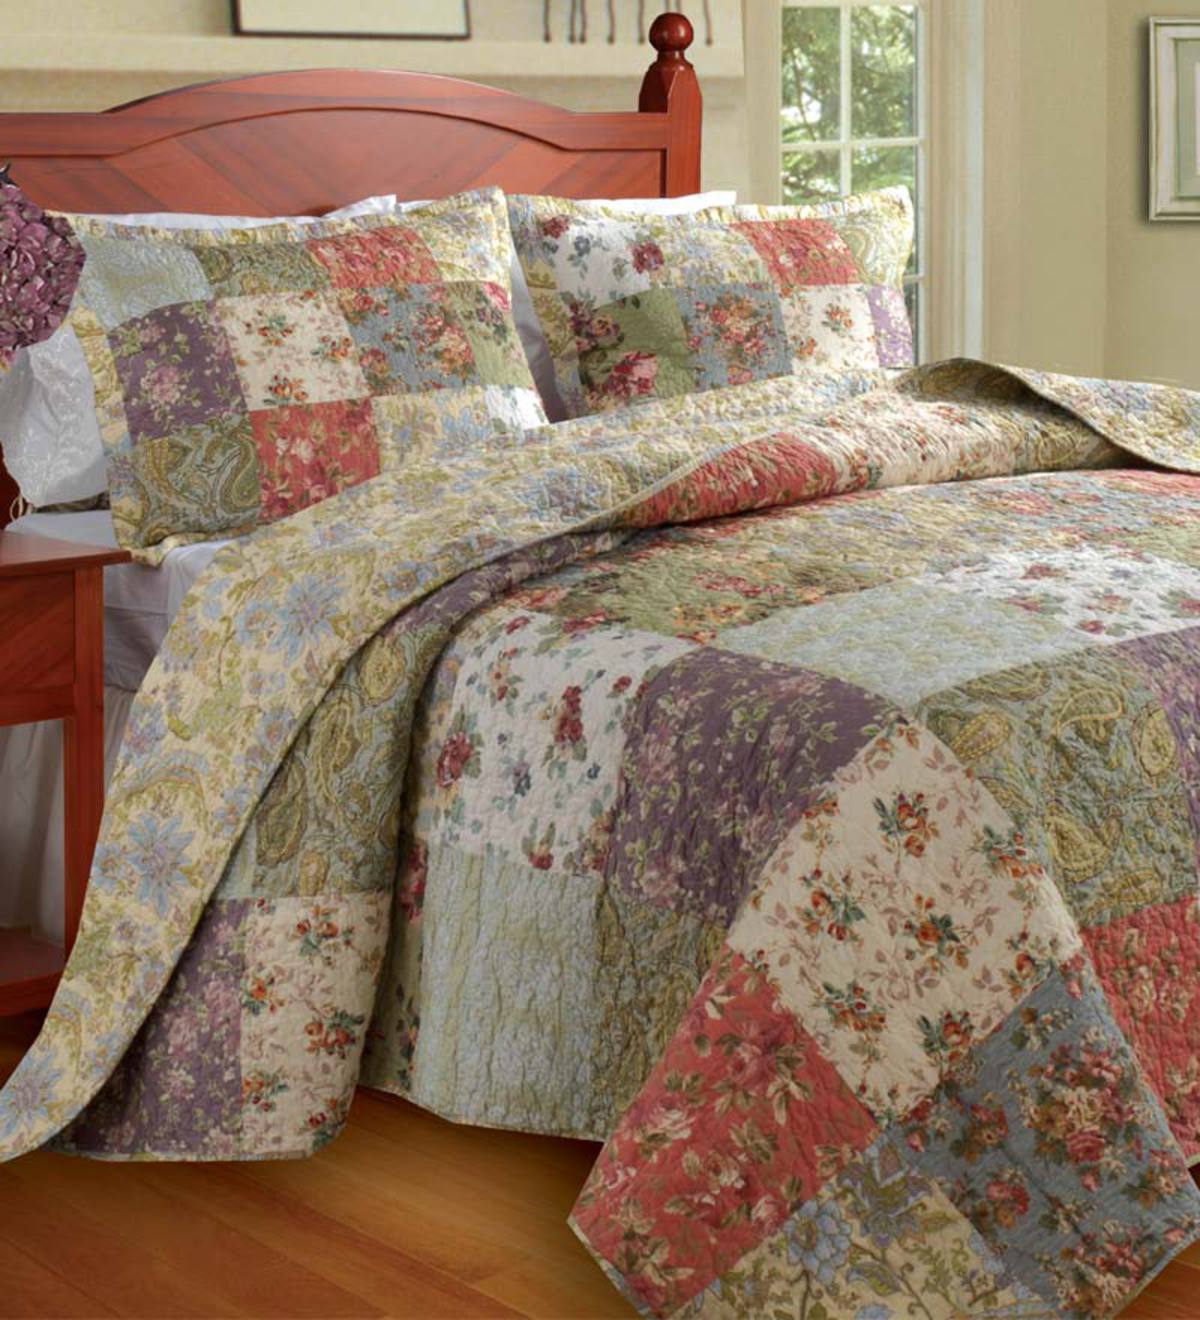 Cotton Wildflower Patchwork Block Reversible Bedspread And Shams